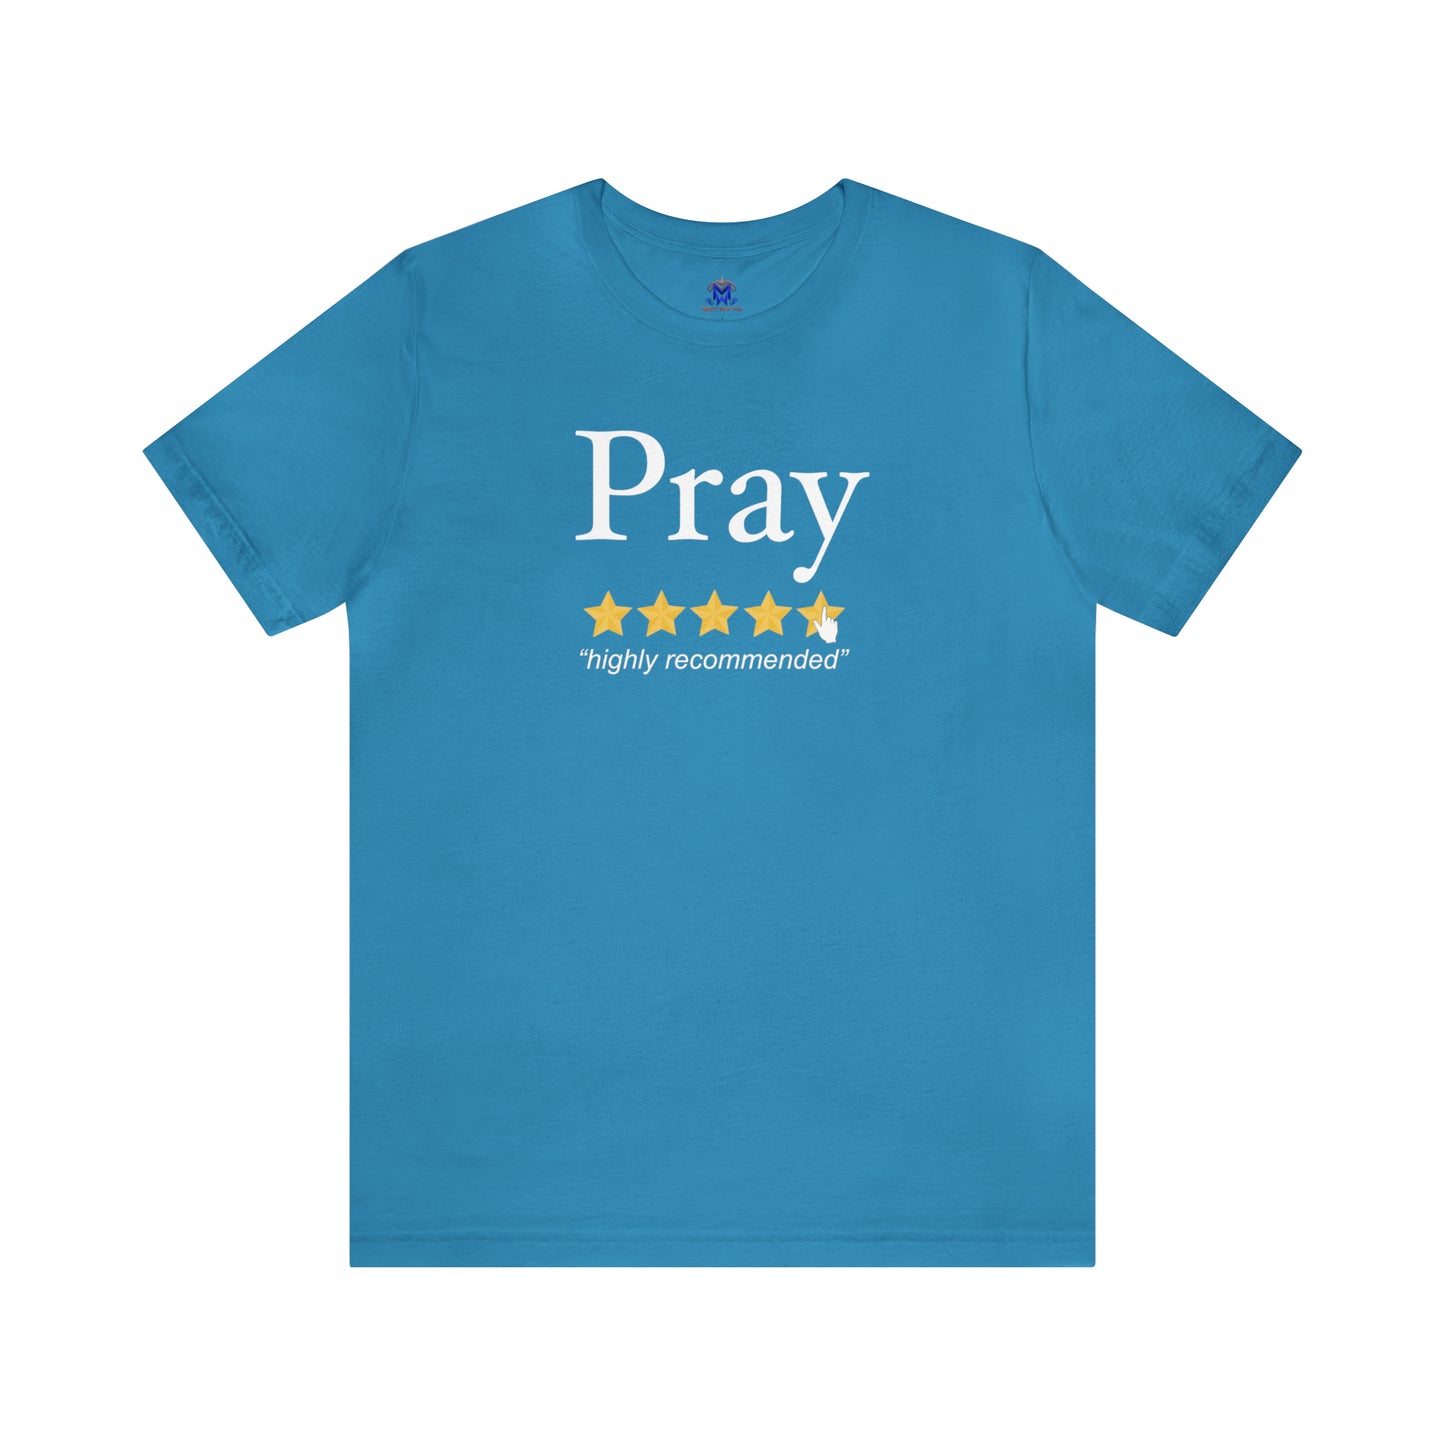 Pray- Crewneck ( Available in more colors)